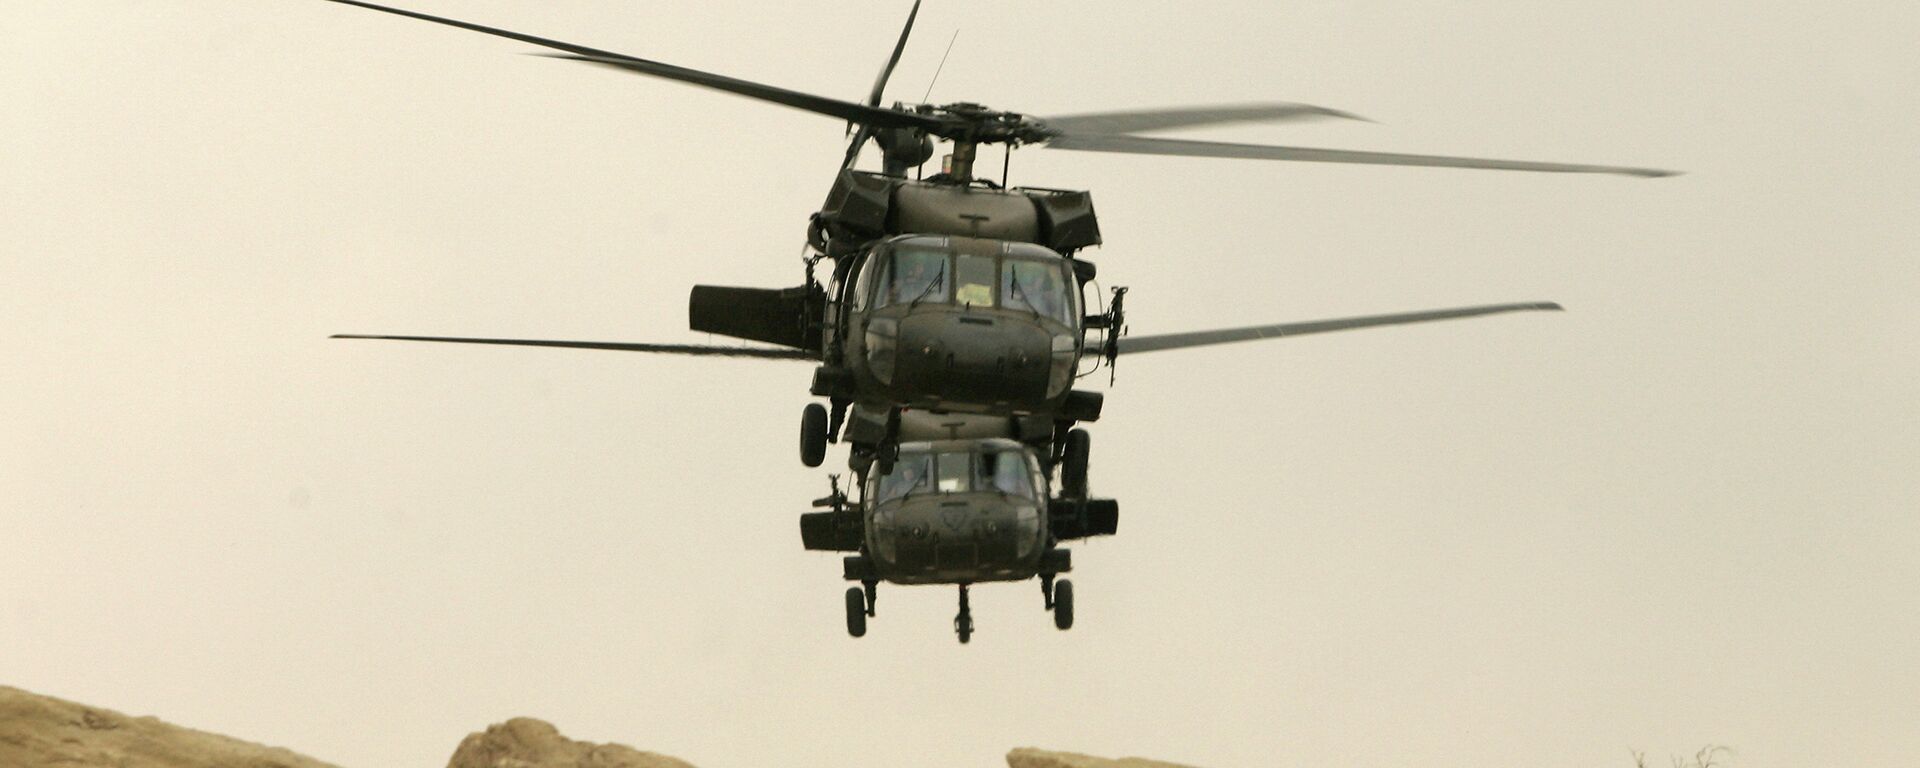 Two US military Black Hawk helicopters take off from its compound in the northern Iraqi city of Mosul (file photo) - Sputnik Mundo, 1920, 12.07.2021